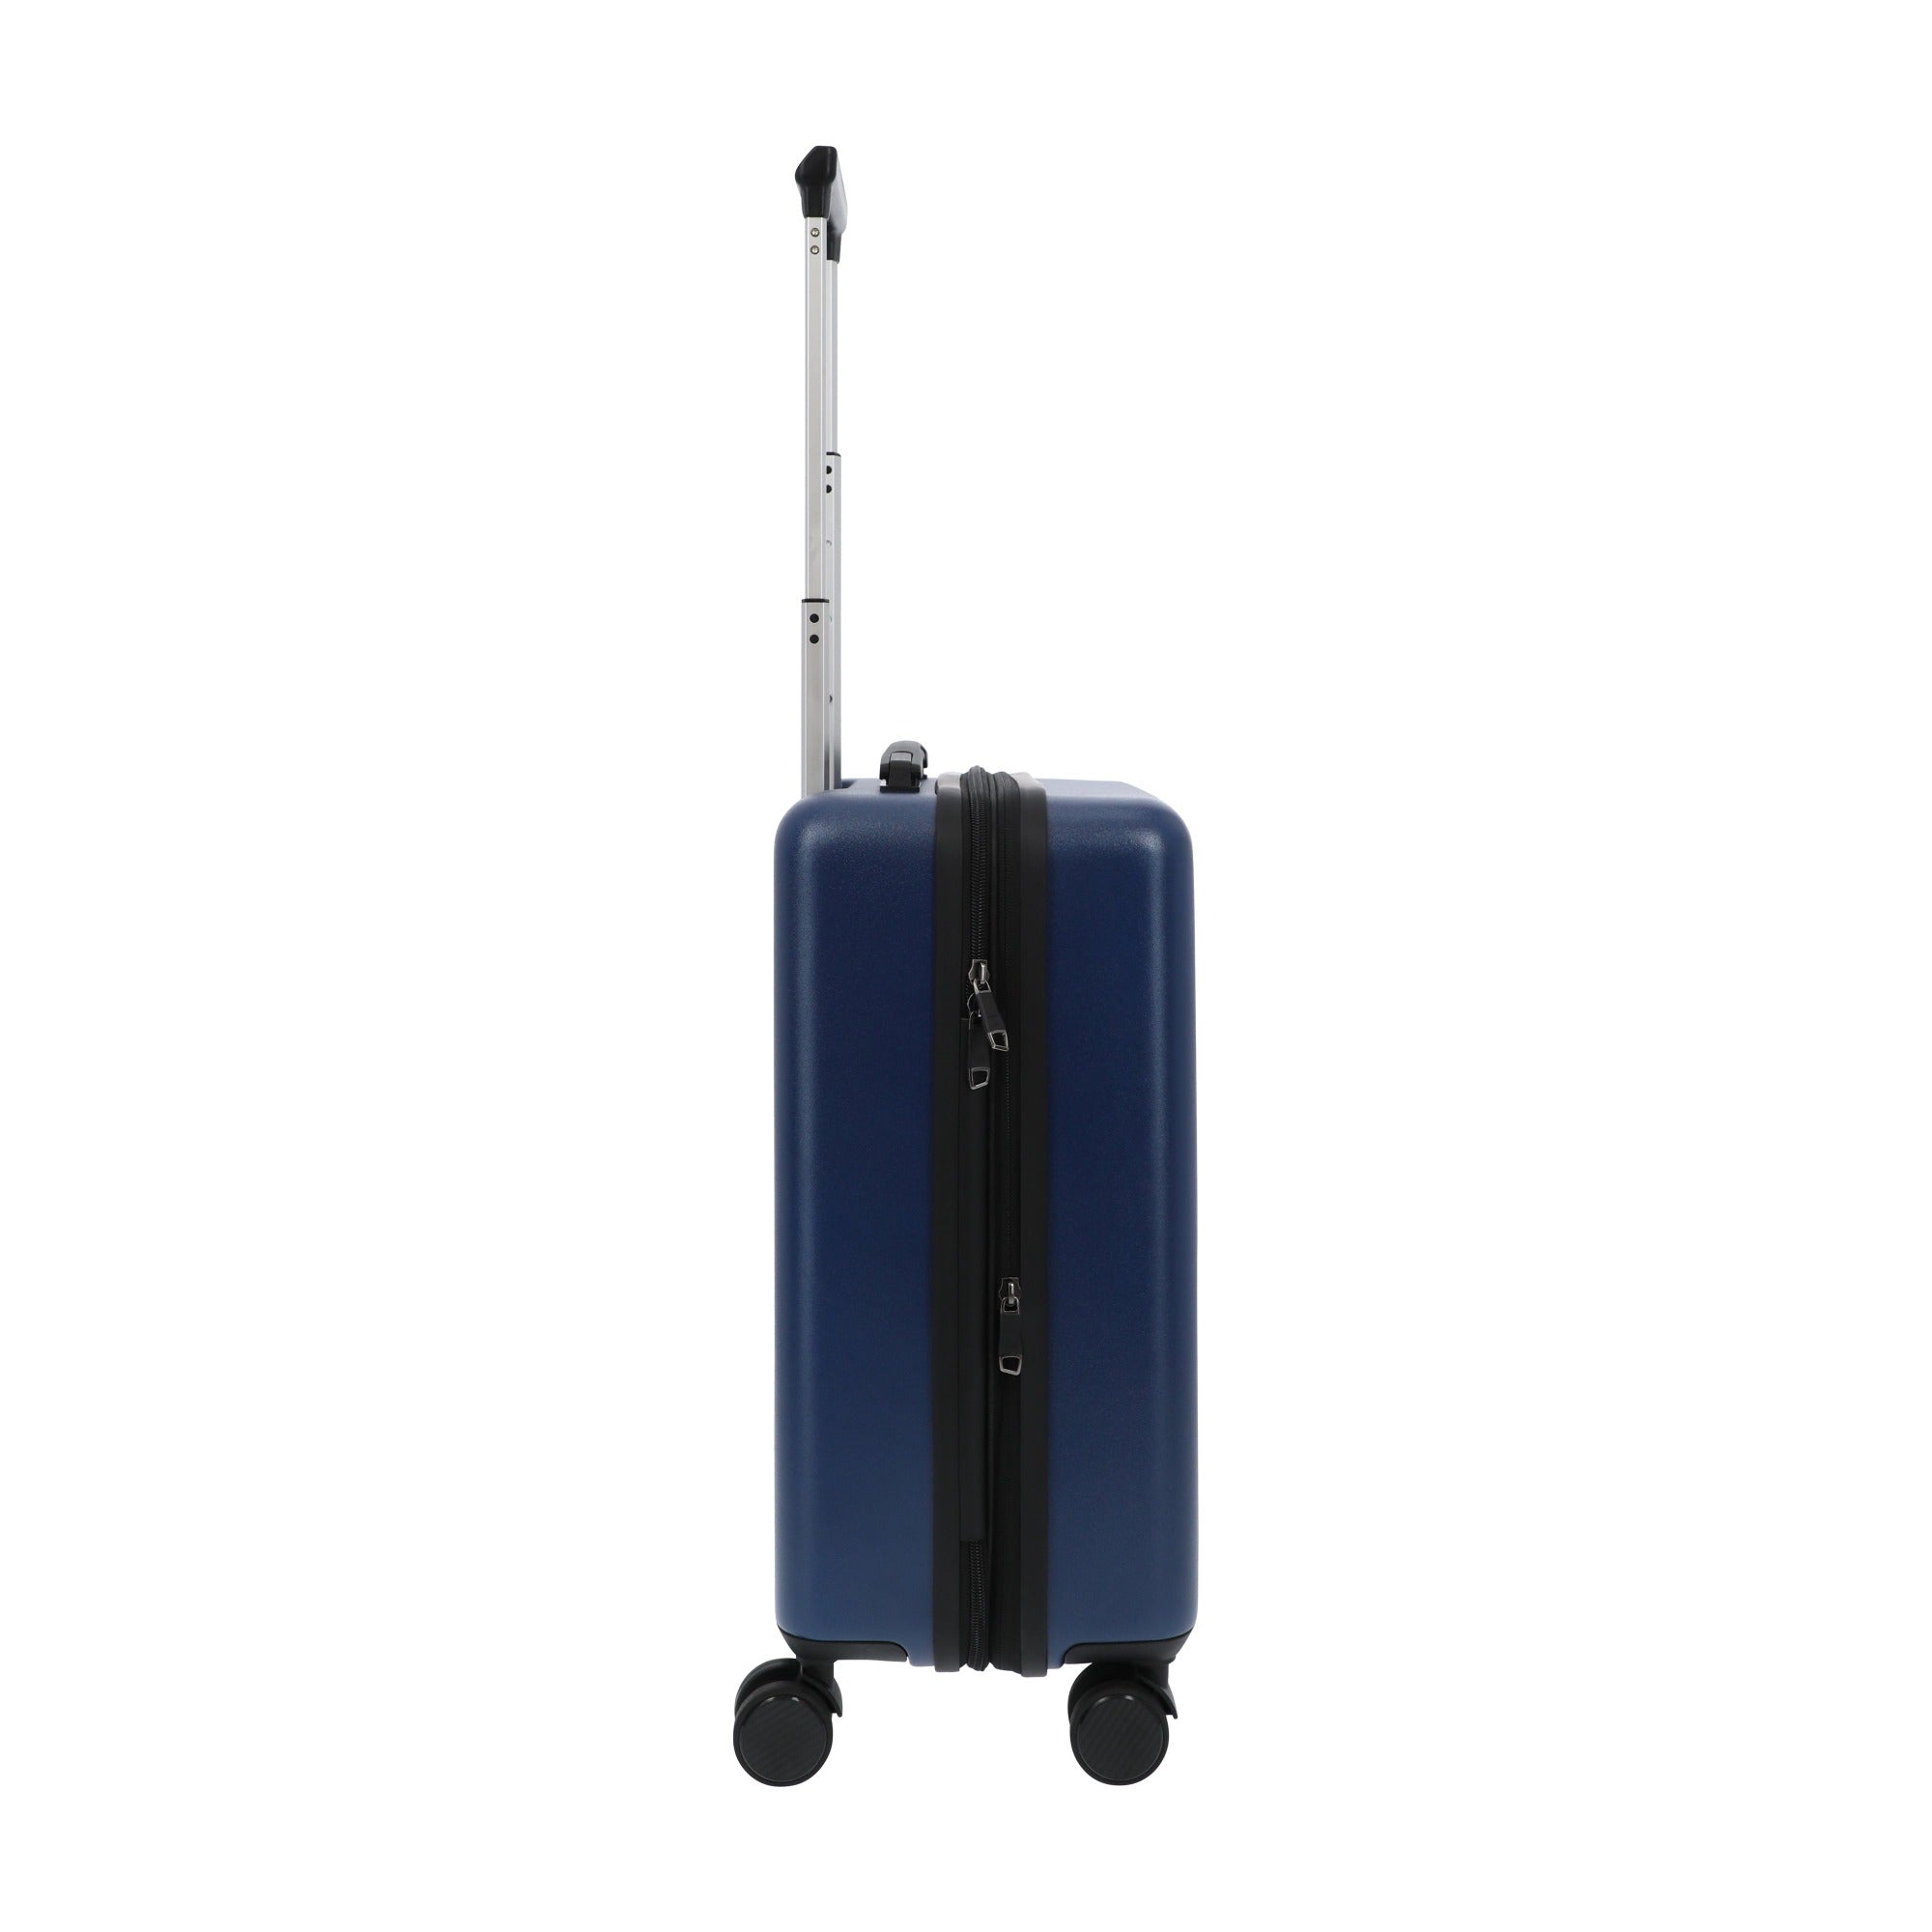 Navy blue 22.5" carry-on spinner suitcase luggage by Ful